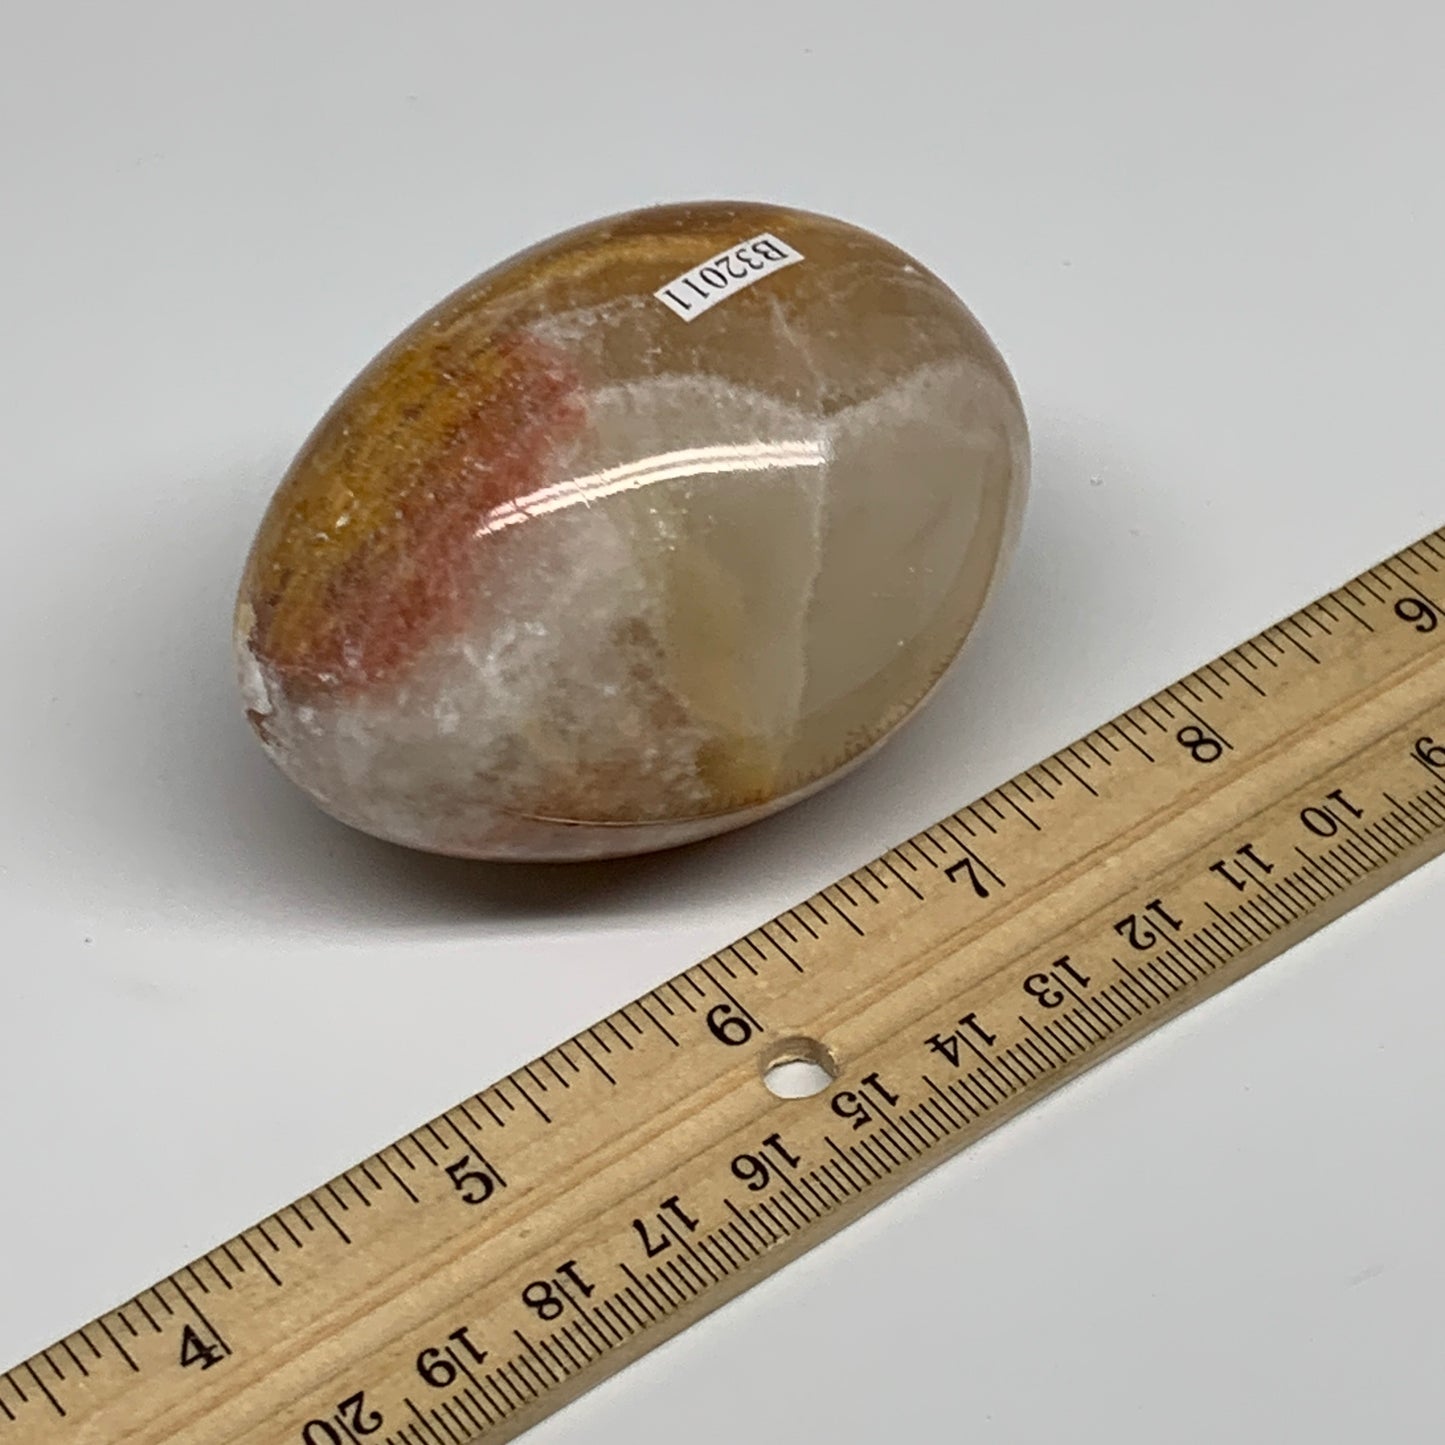 253g, 2.7"x2" Natural Green Onyx Egg Gemstone Mineral, from Pakistan, B32011